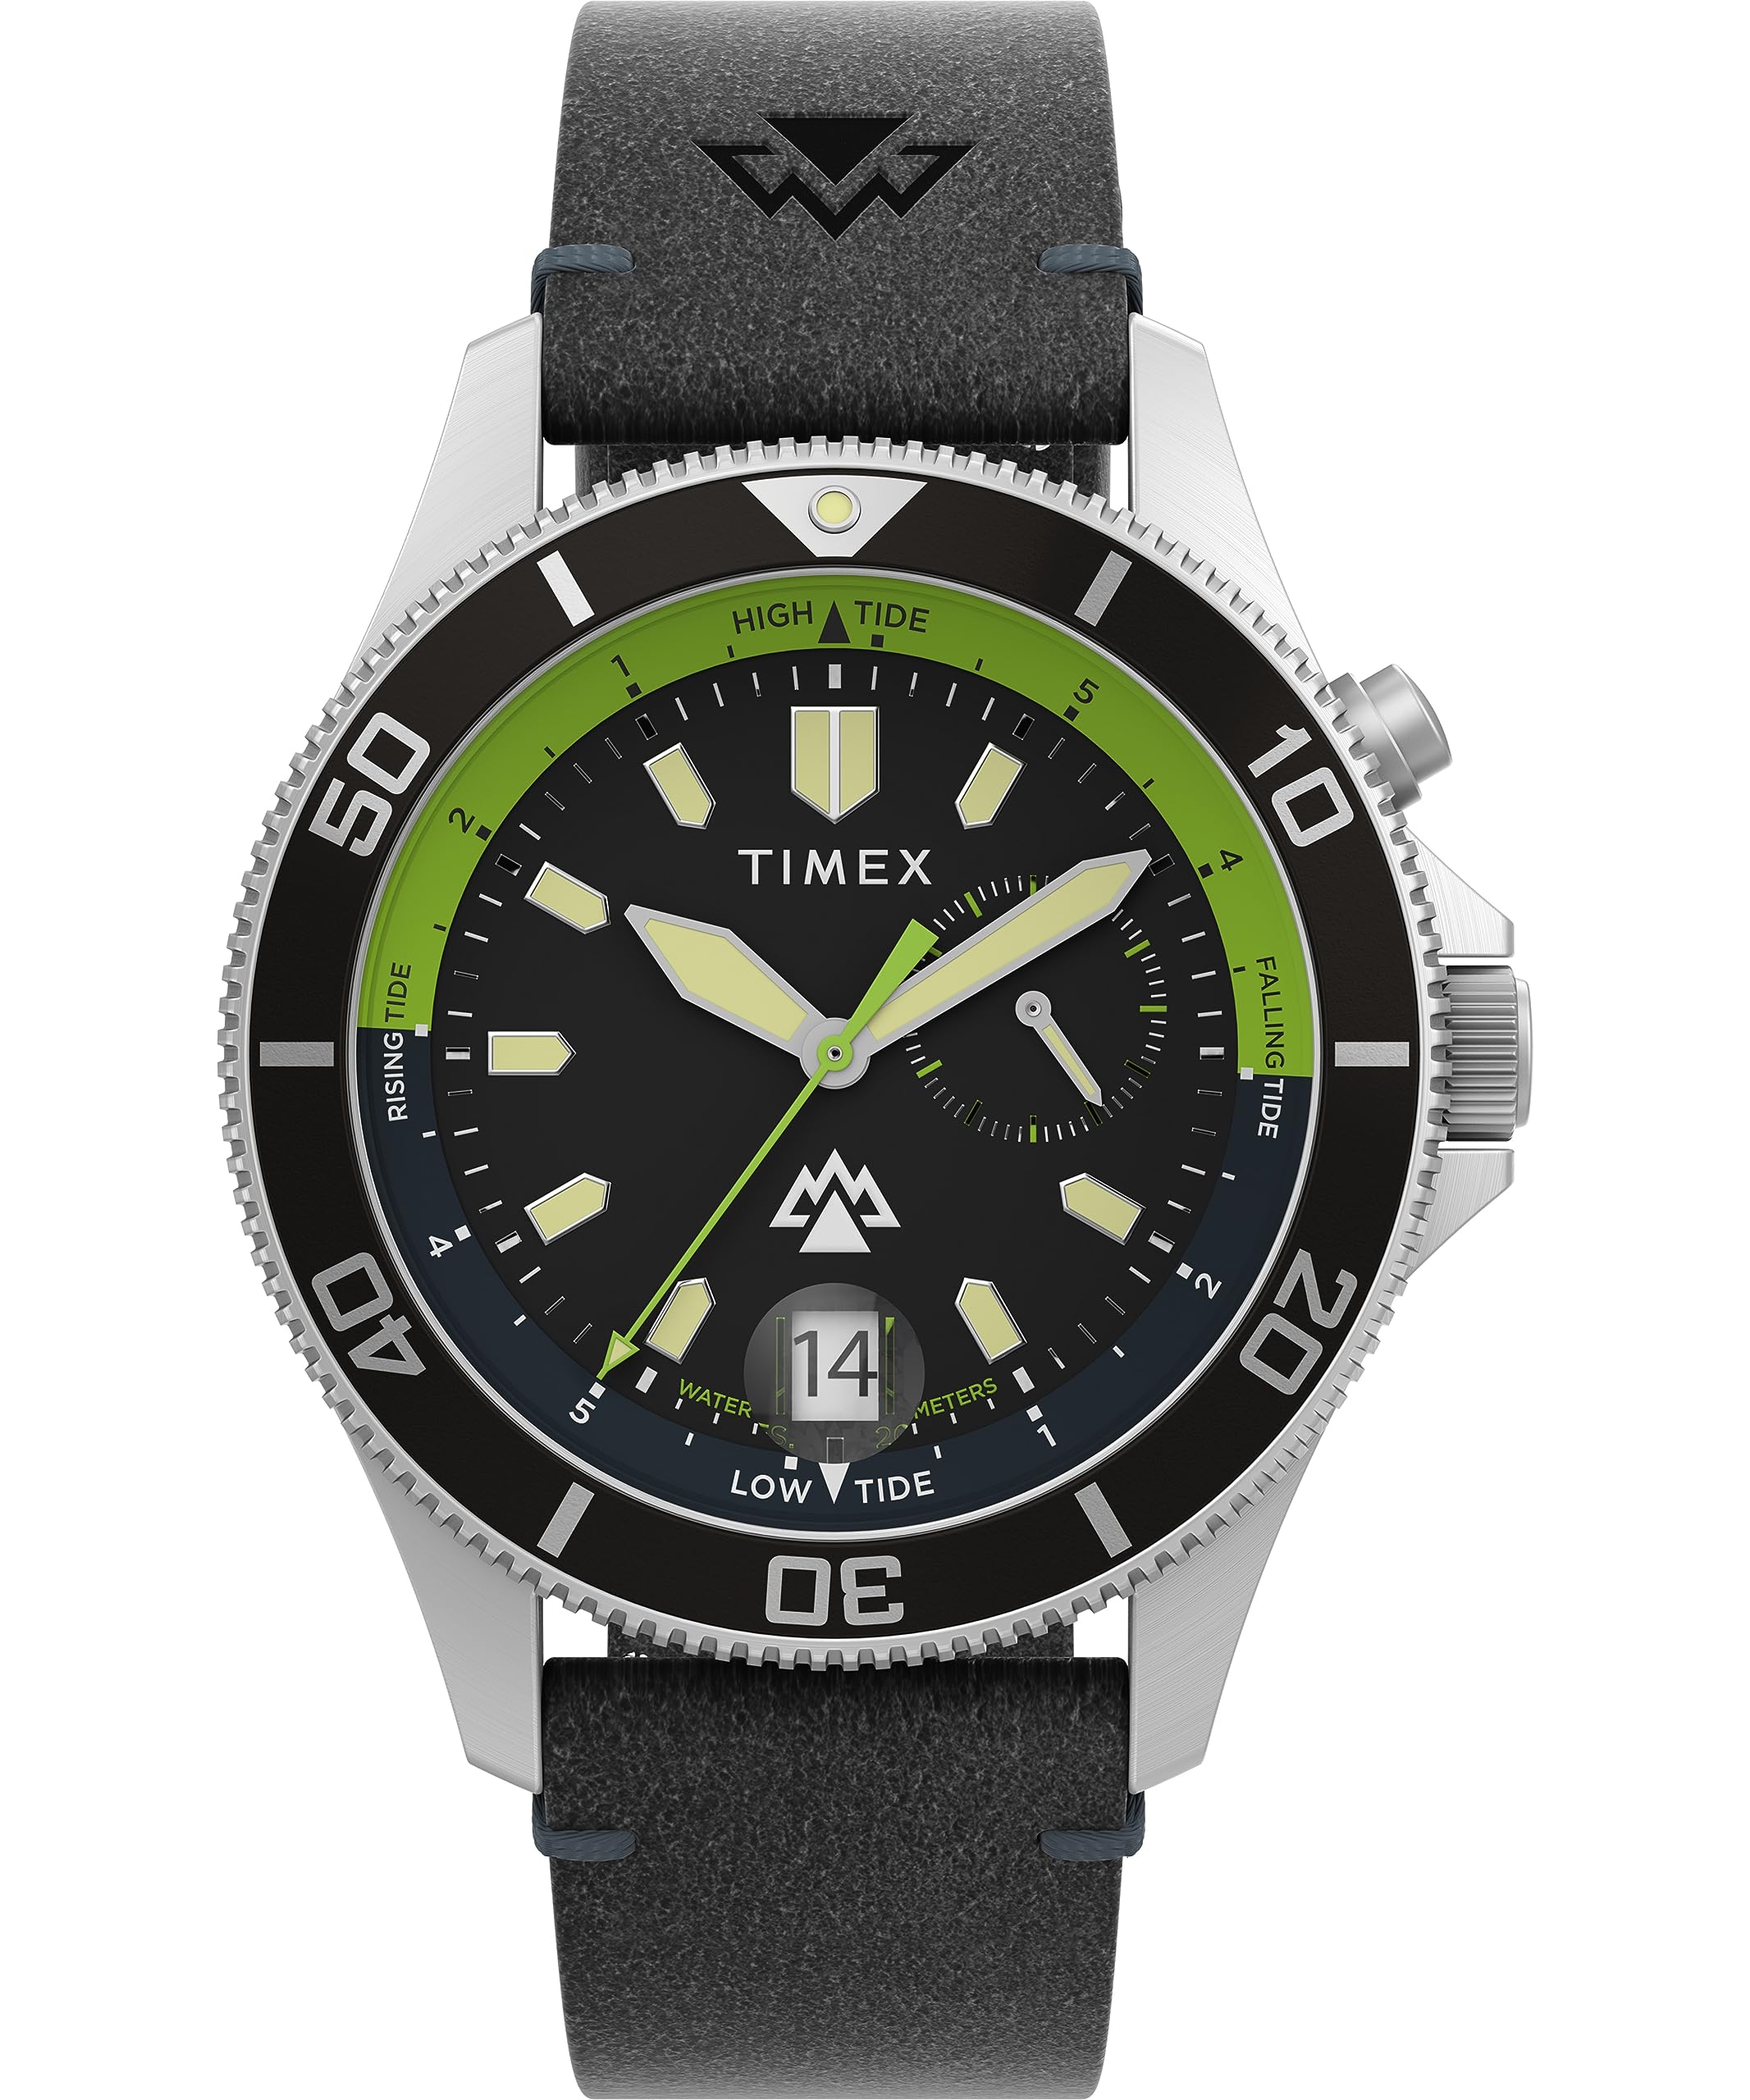 Timex 41 mm Expedition North Slack Tide Watch